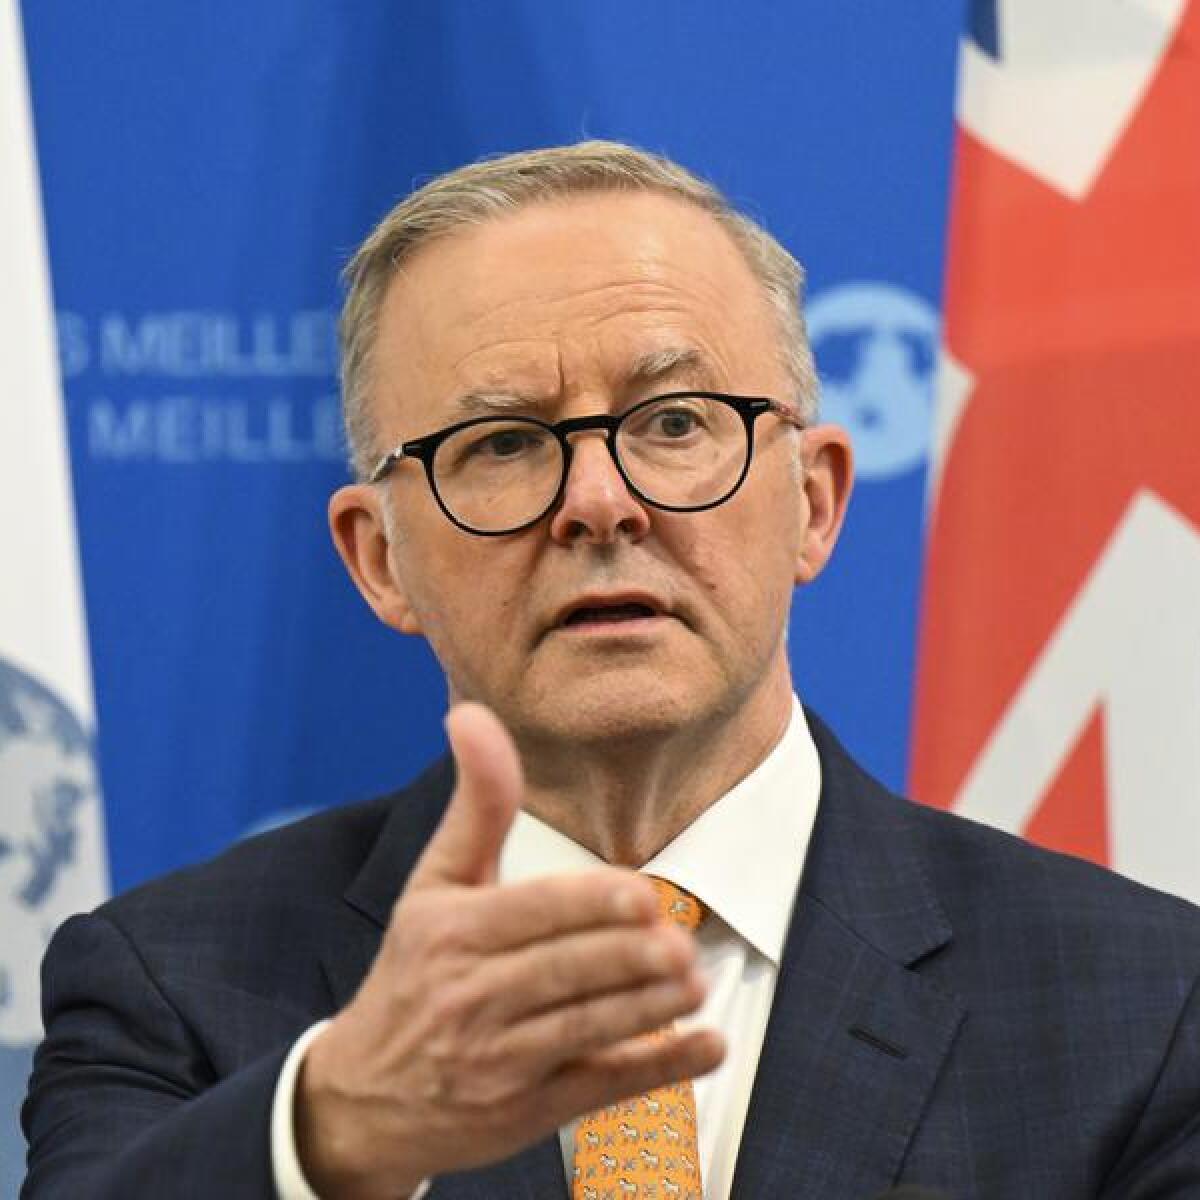 Anthony Albanese at a press conference at OECD headquarters.